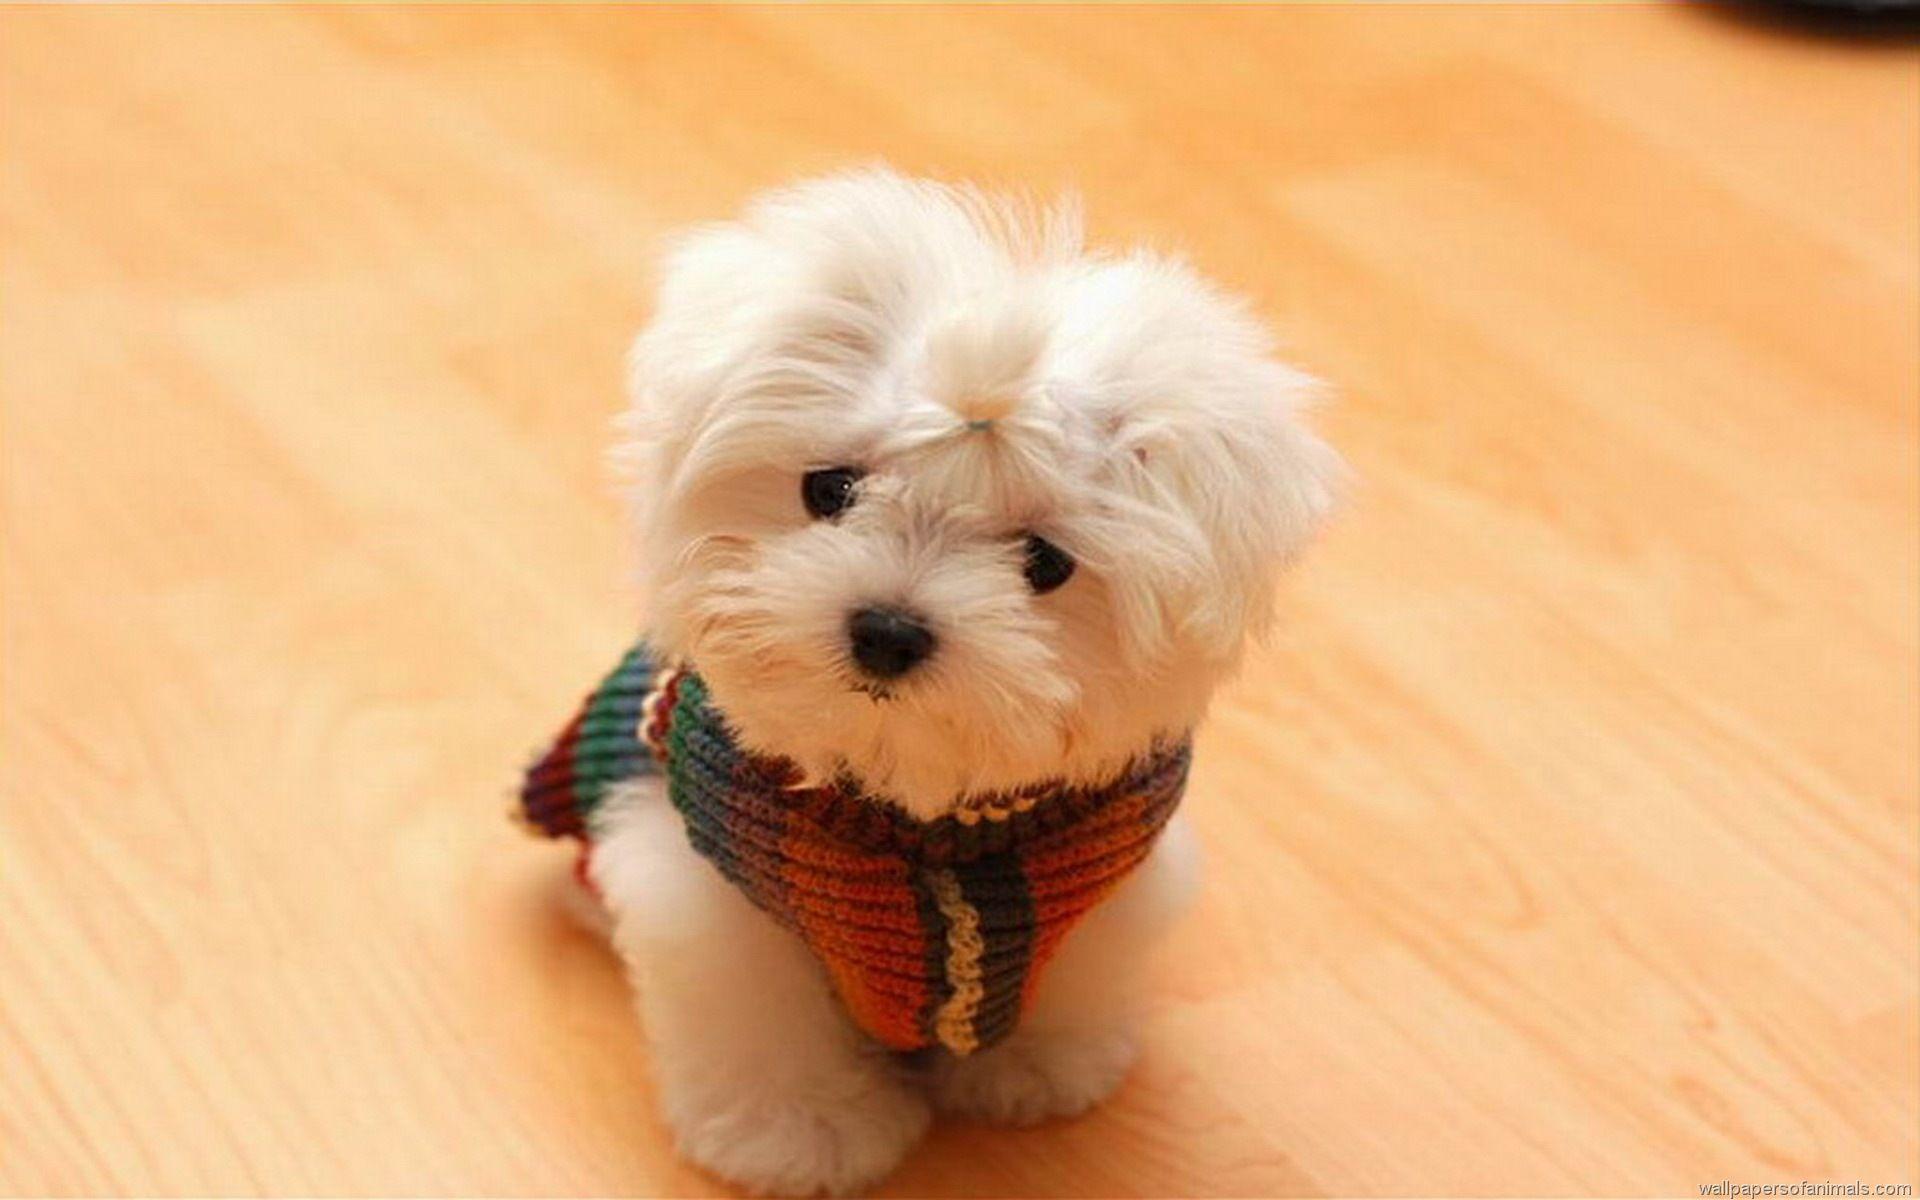 Cute Dog wallpapers